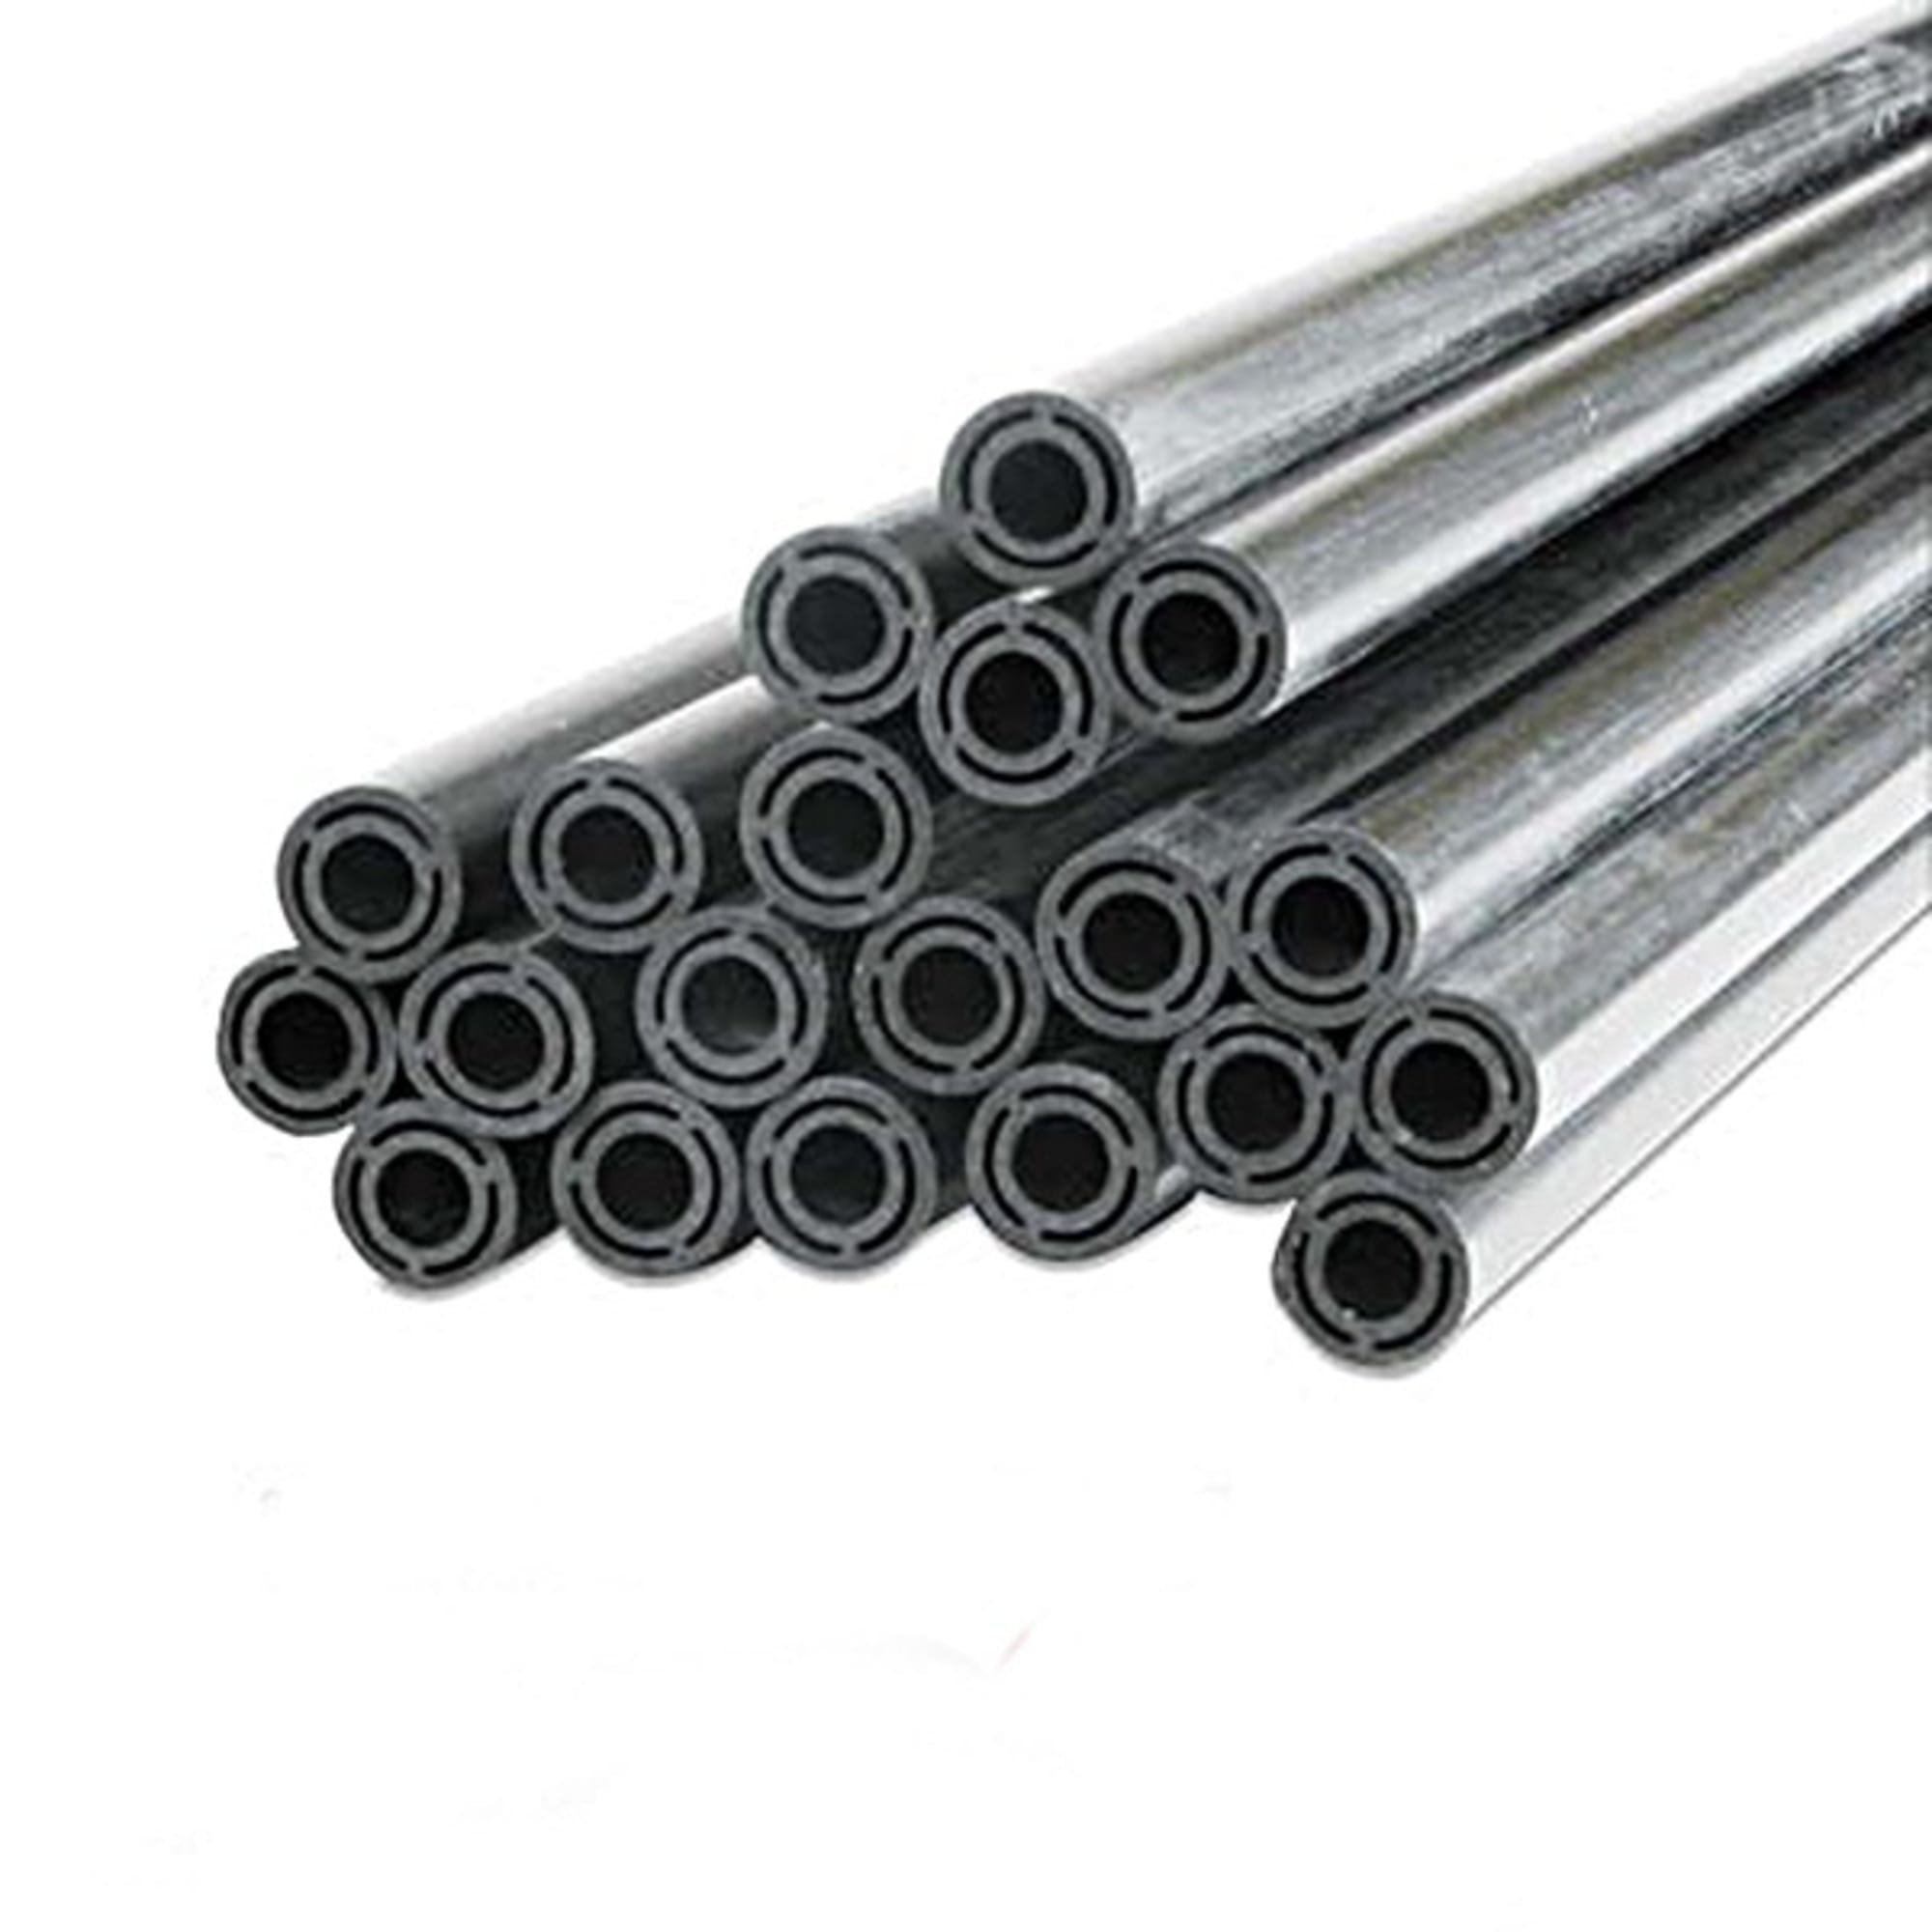 CARBON round tube, double wall (Ø 8.5 / 7.1 x 6 / 4)